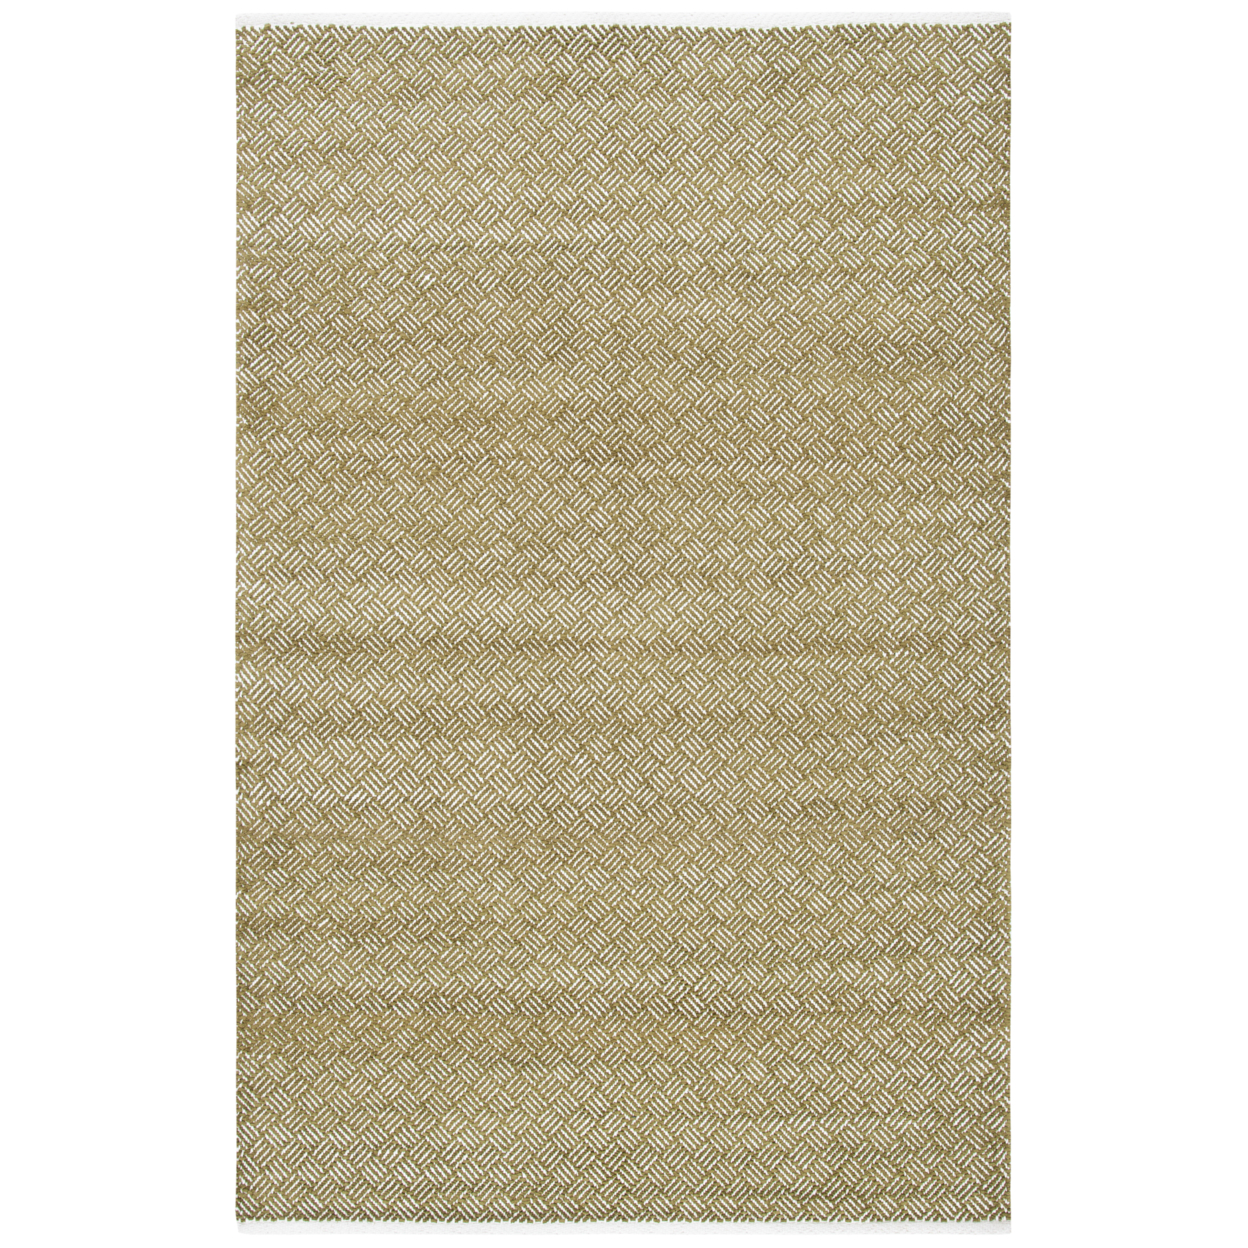 SAFAVIEH Boston Collection BOS680B Handwoven Olive Rug - 4' X 6'